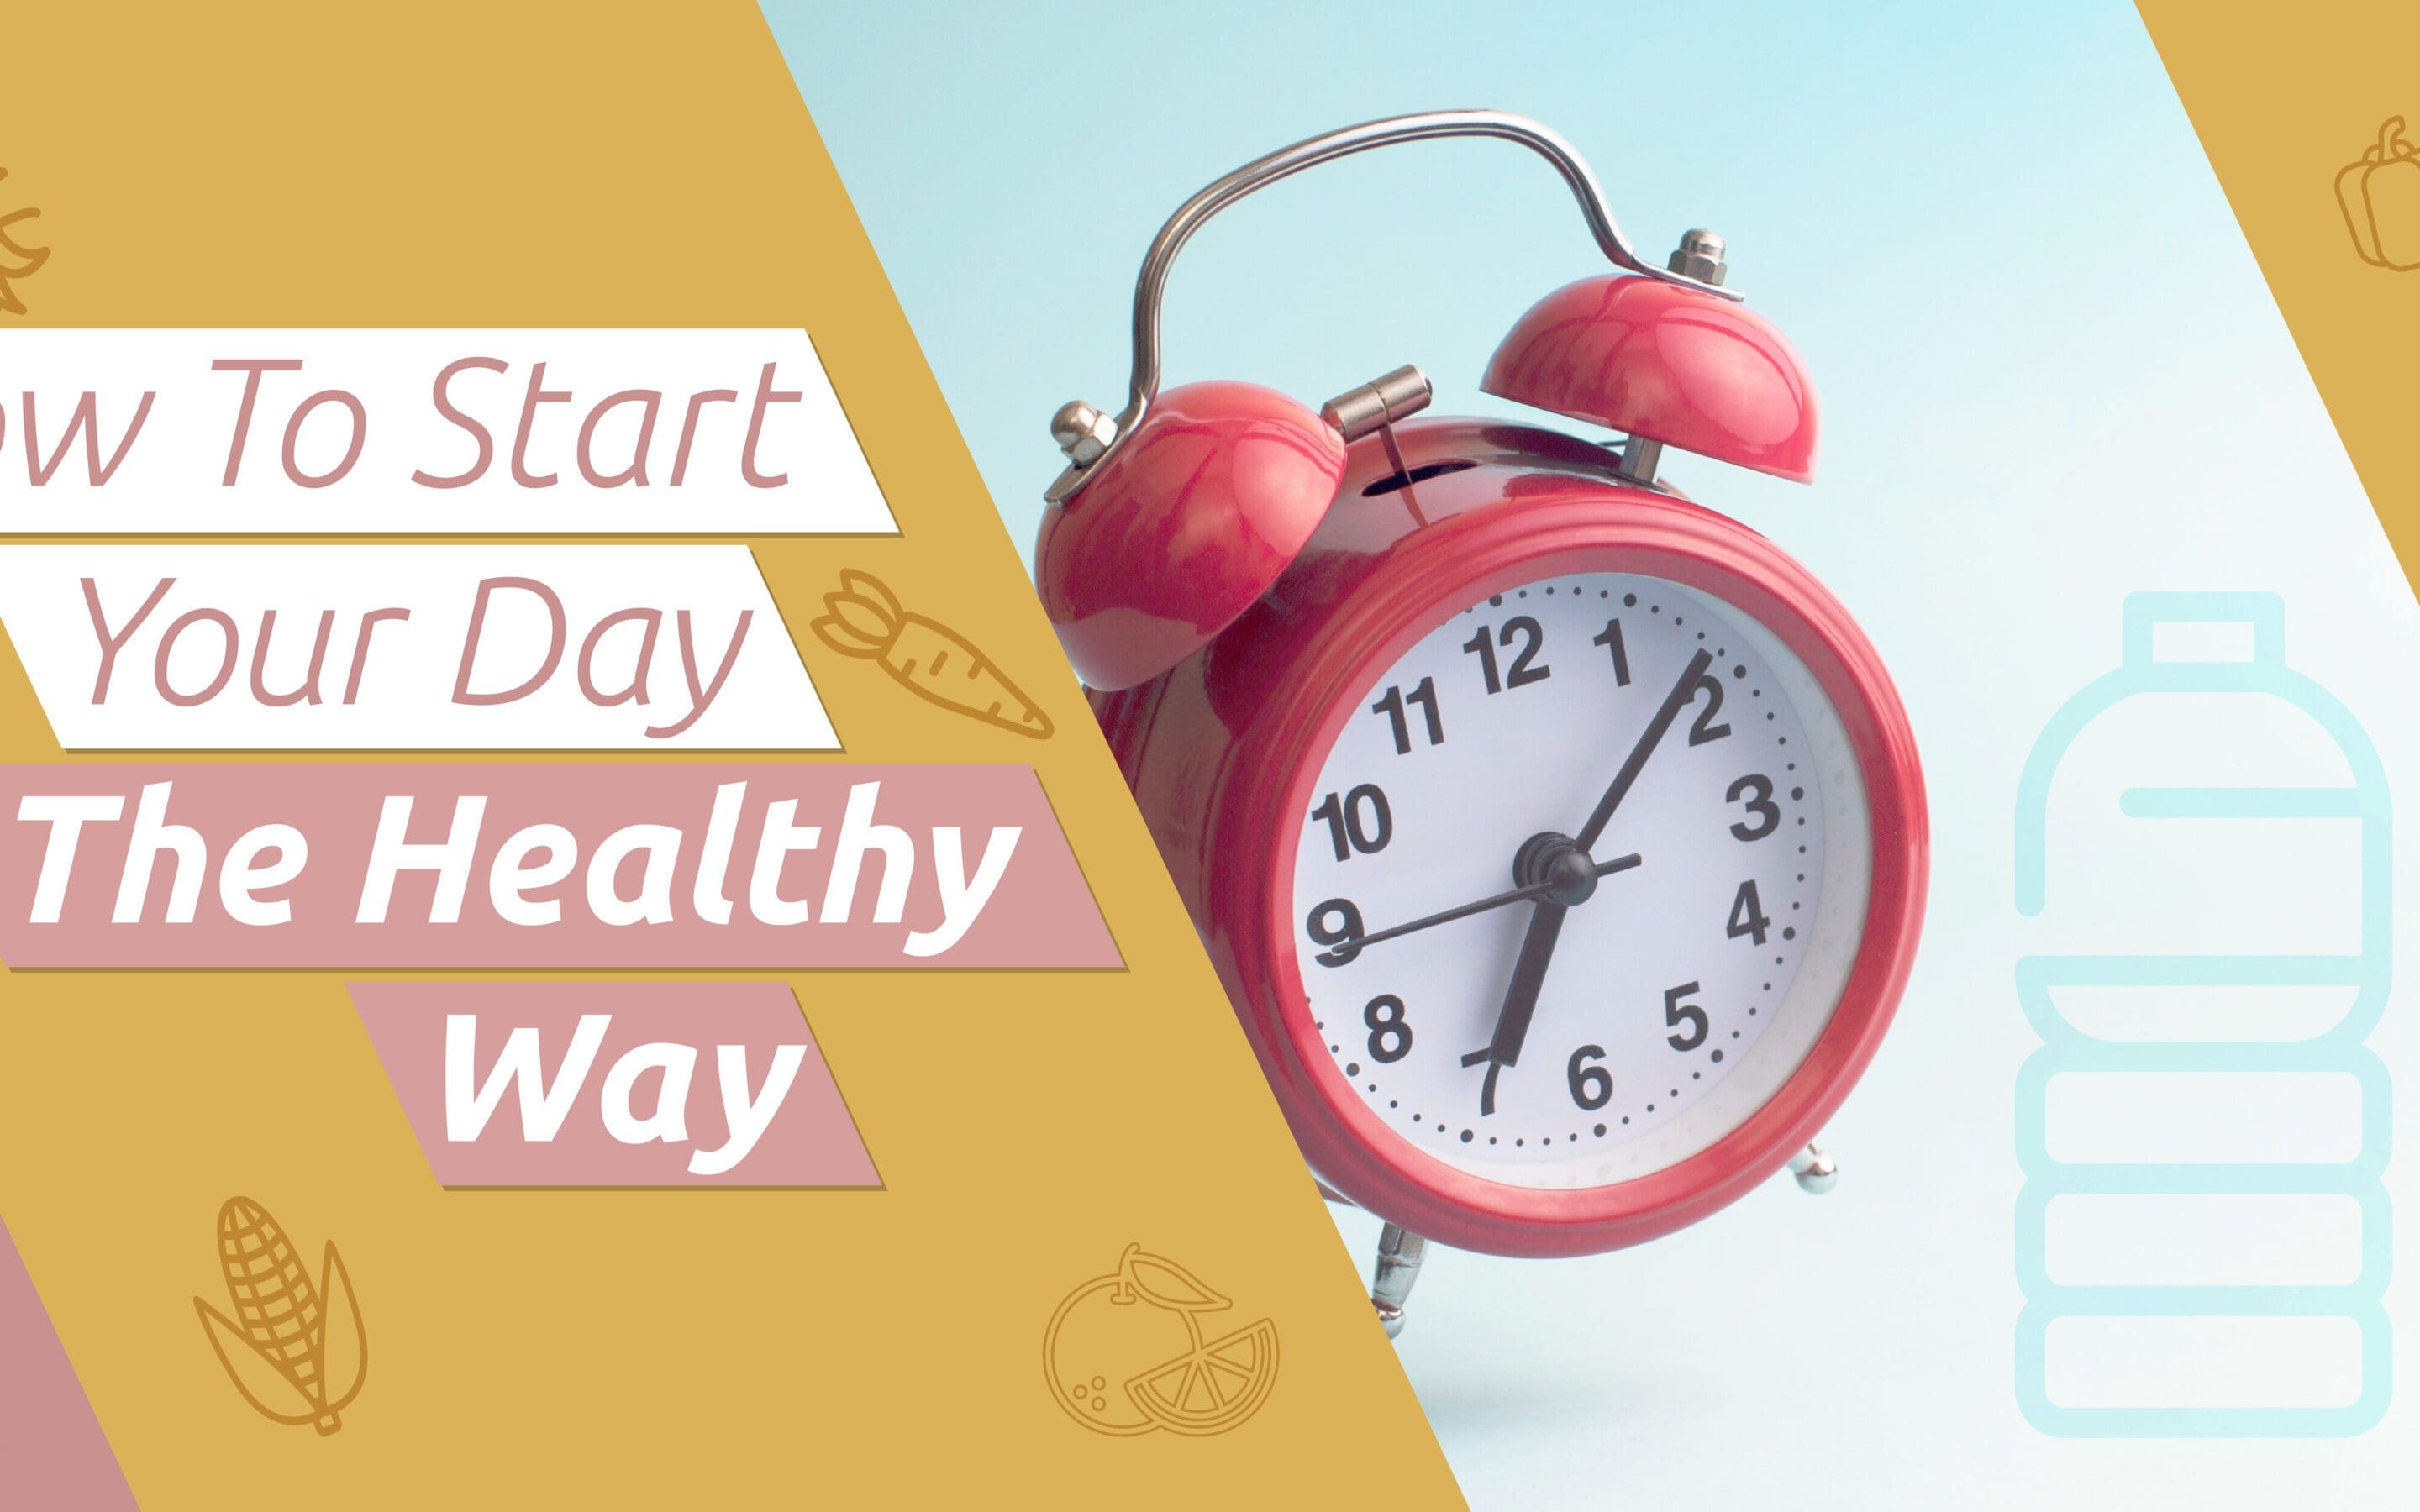 How To Start Your Day The Healthy Way